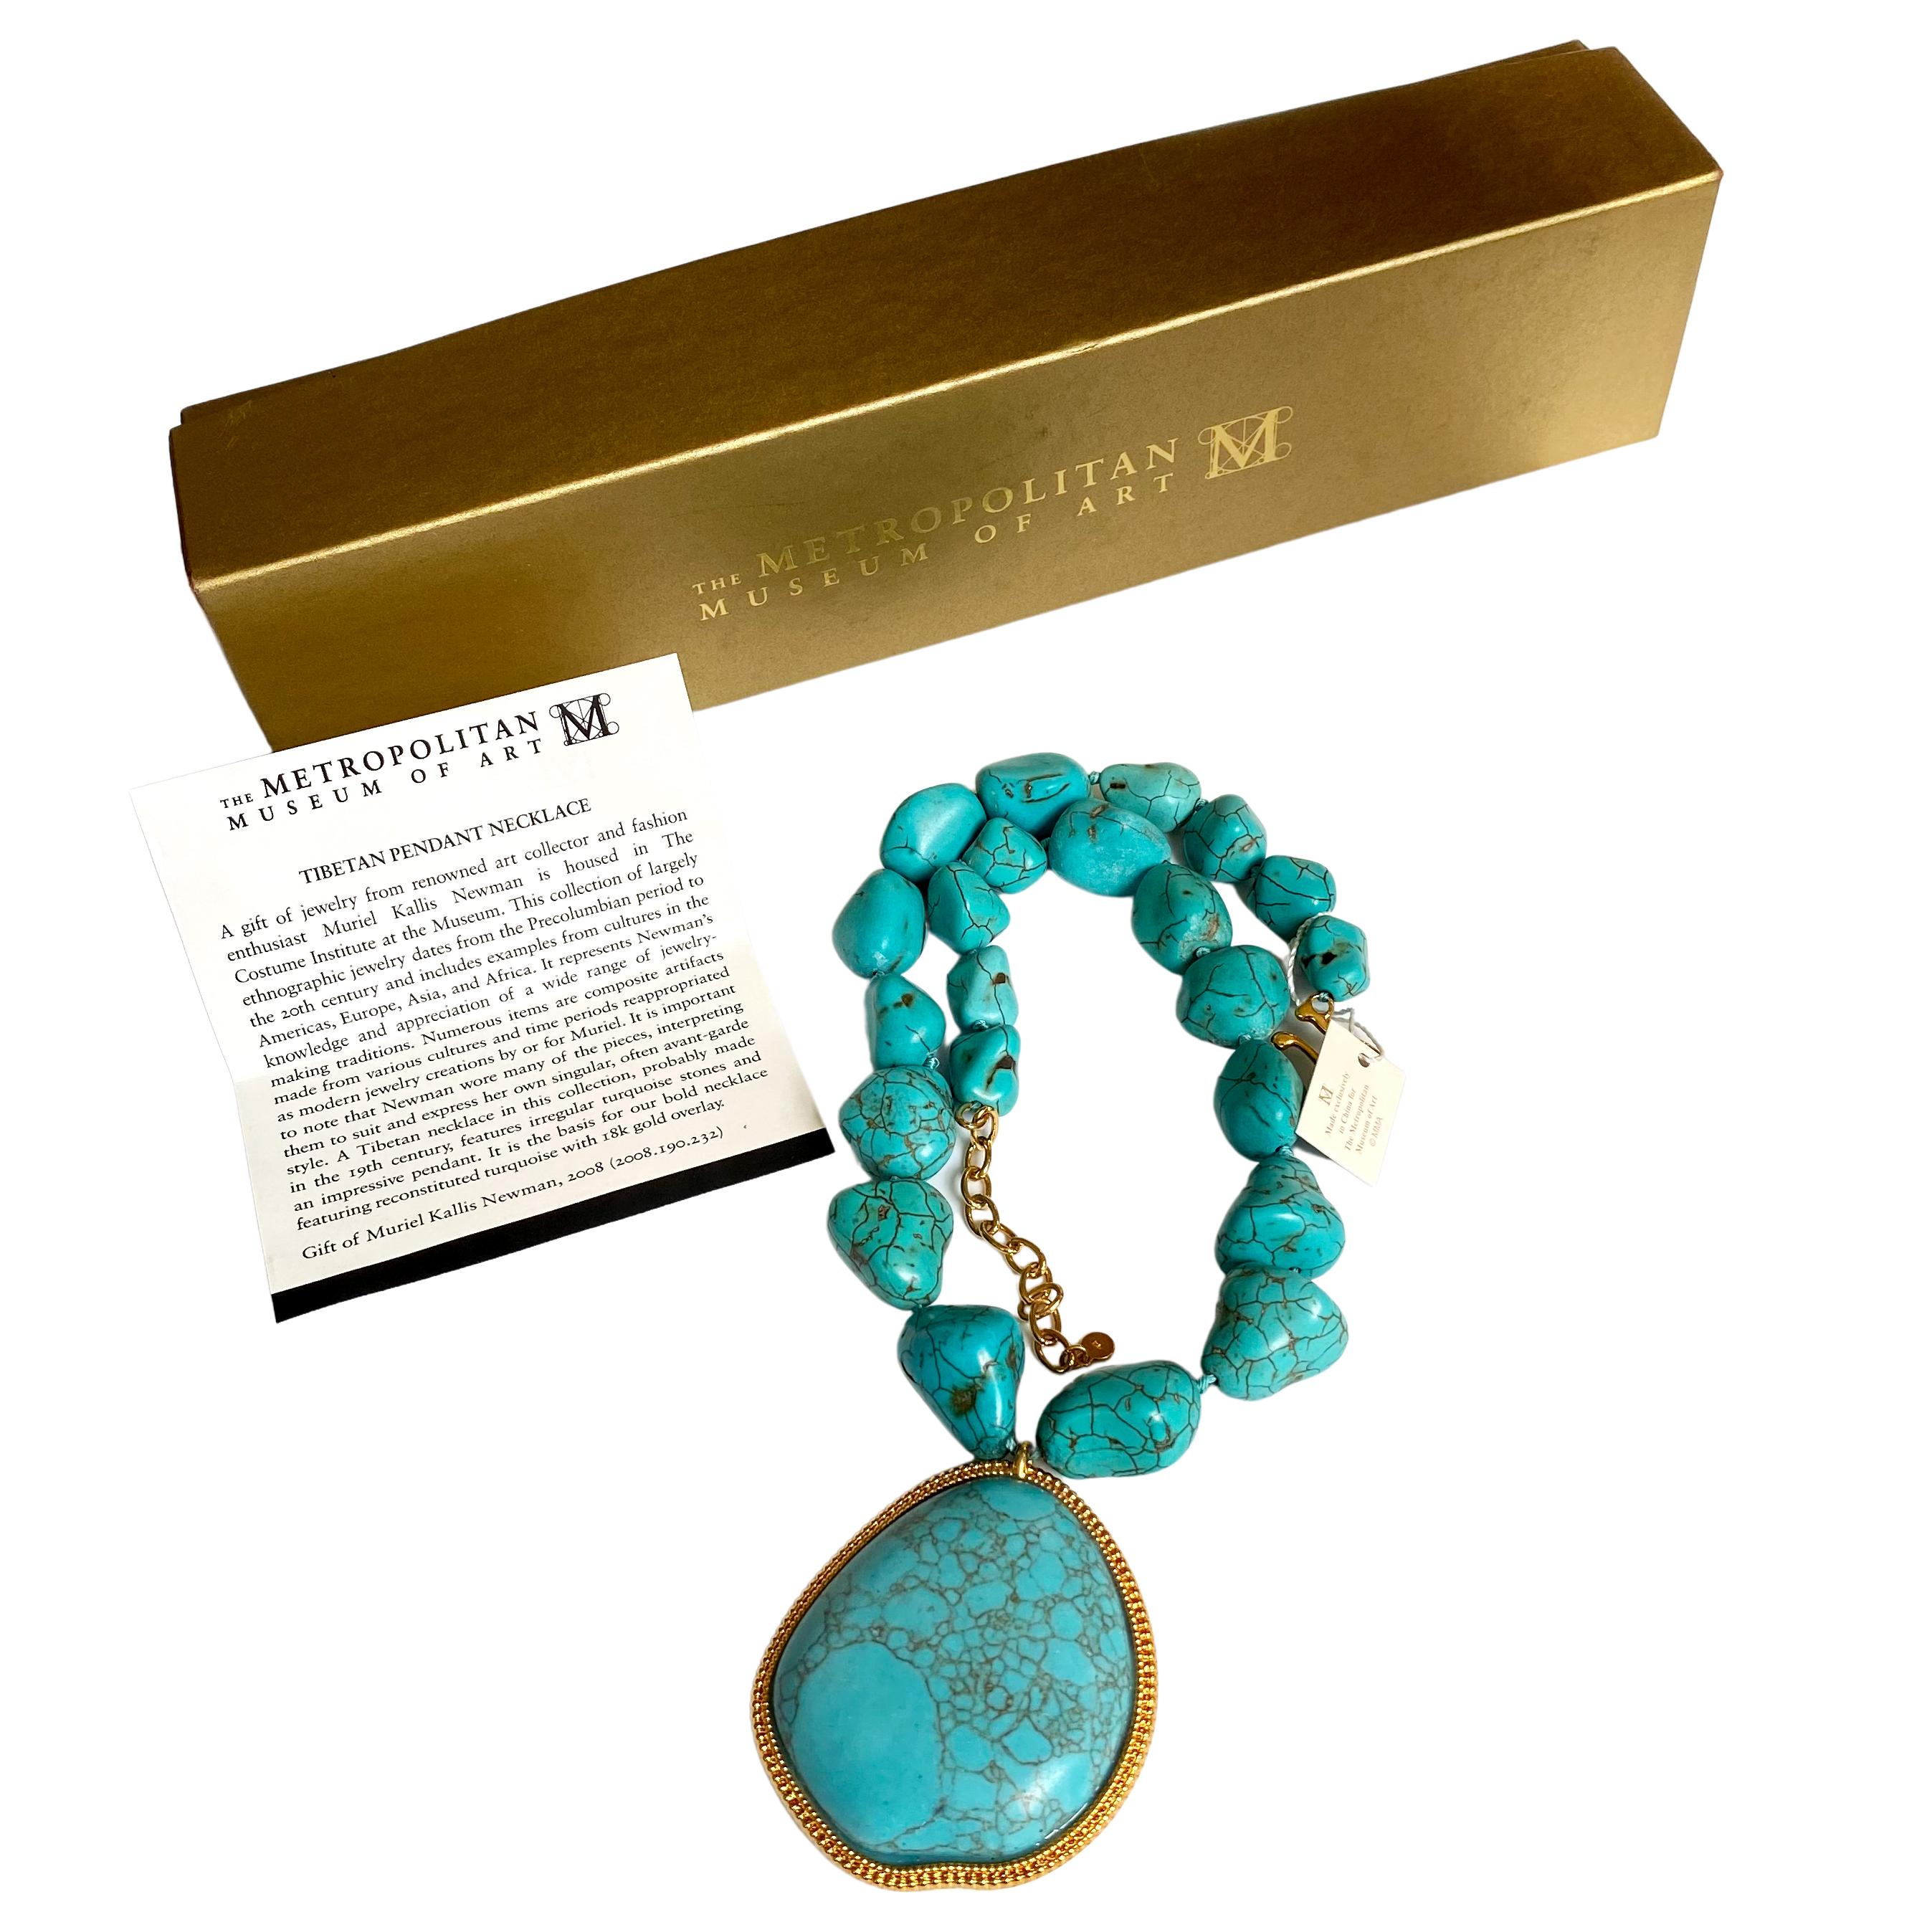 From the Metropolitan Museum of Art collection. 
Photos are taken of the actual item - see its unique spiderweb.
Made with reconstituted turquoise and 18K gold overlay.
Model is wearing the necklace with links hooked at mid-length - meaning it can